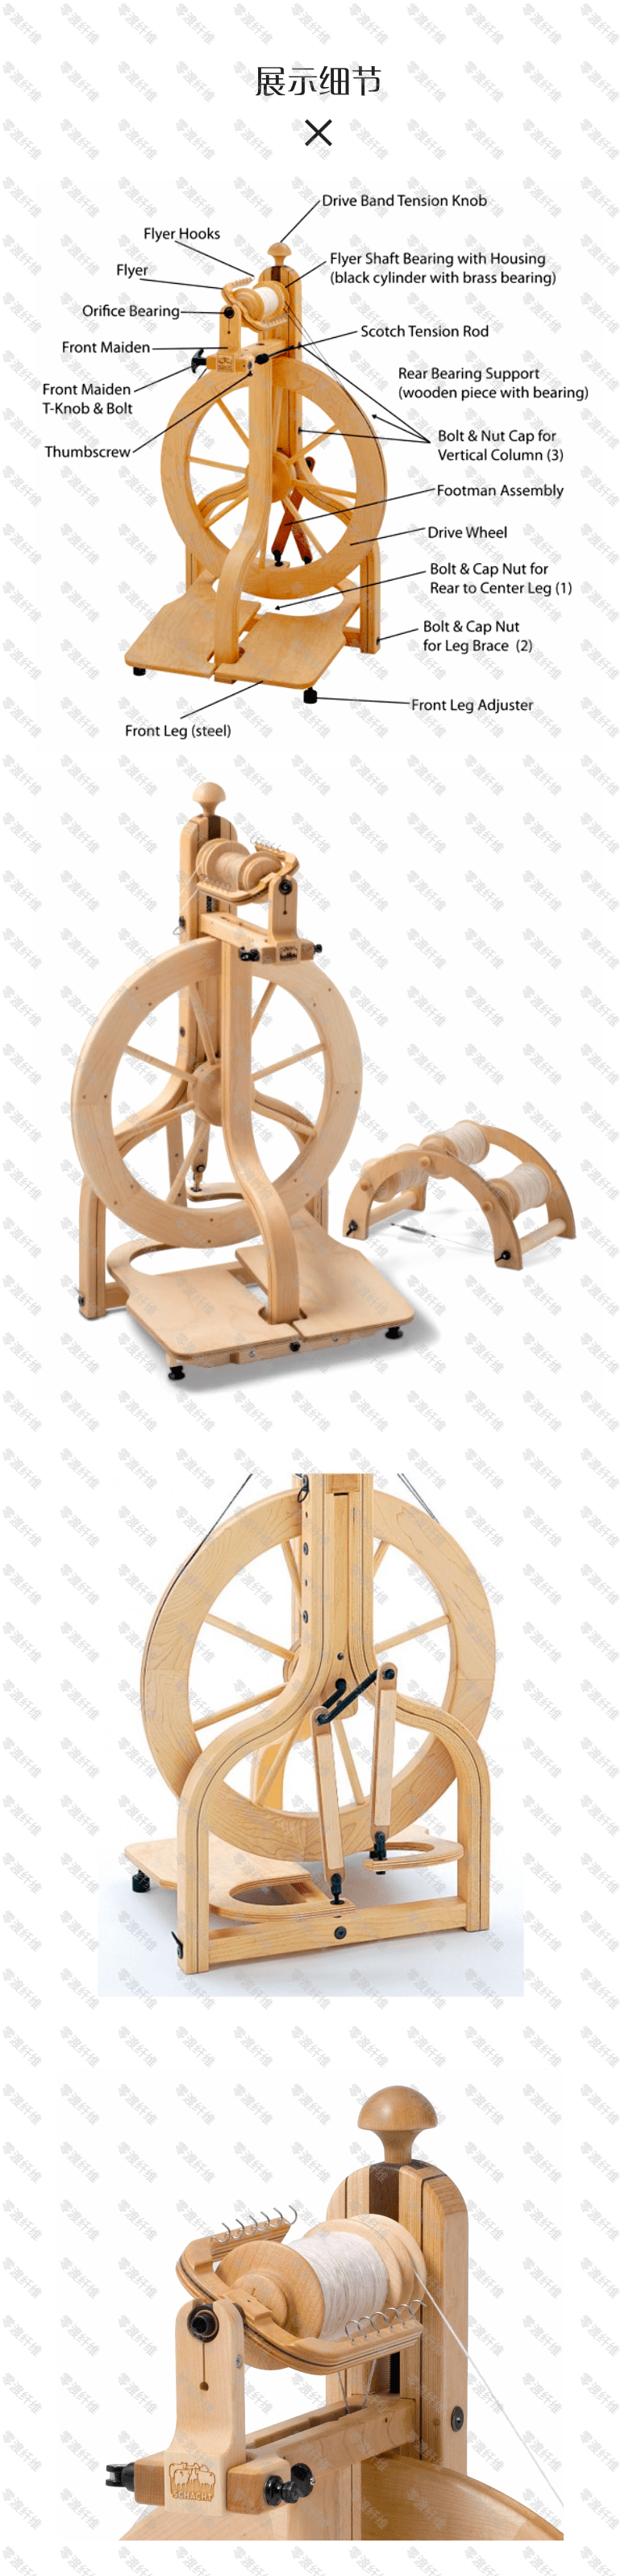 Matchless Spinning Wheel_3@鍑＄蹇浘.png